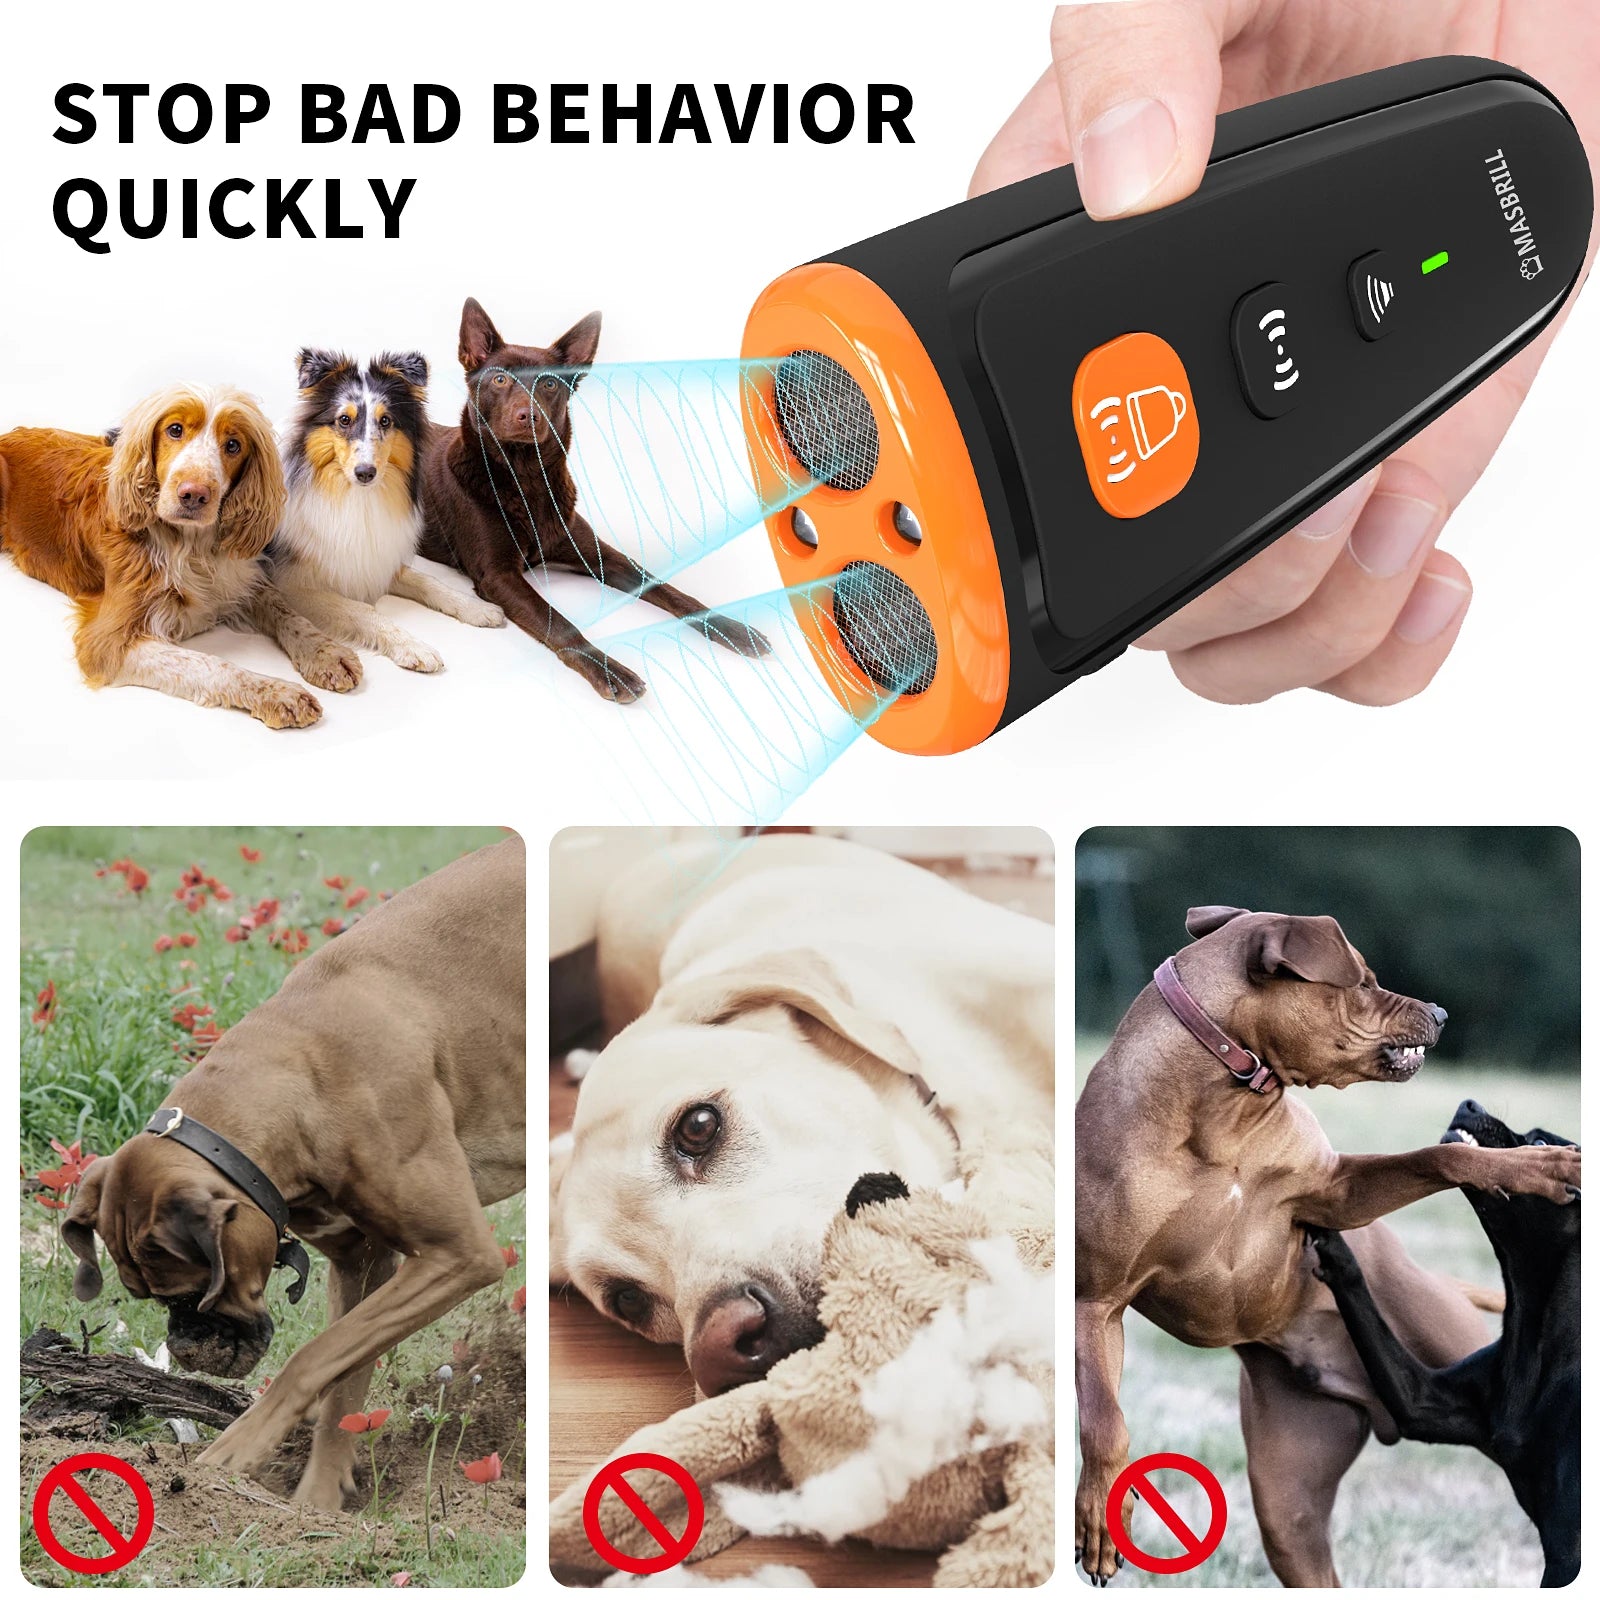 Dog Repeller No Dog Noise anti Barking Device Ultrasonic Dog Bark Deterrent Devices Training 3 Modes USB Rechargeable